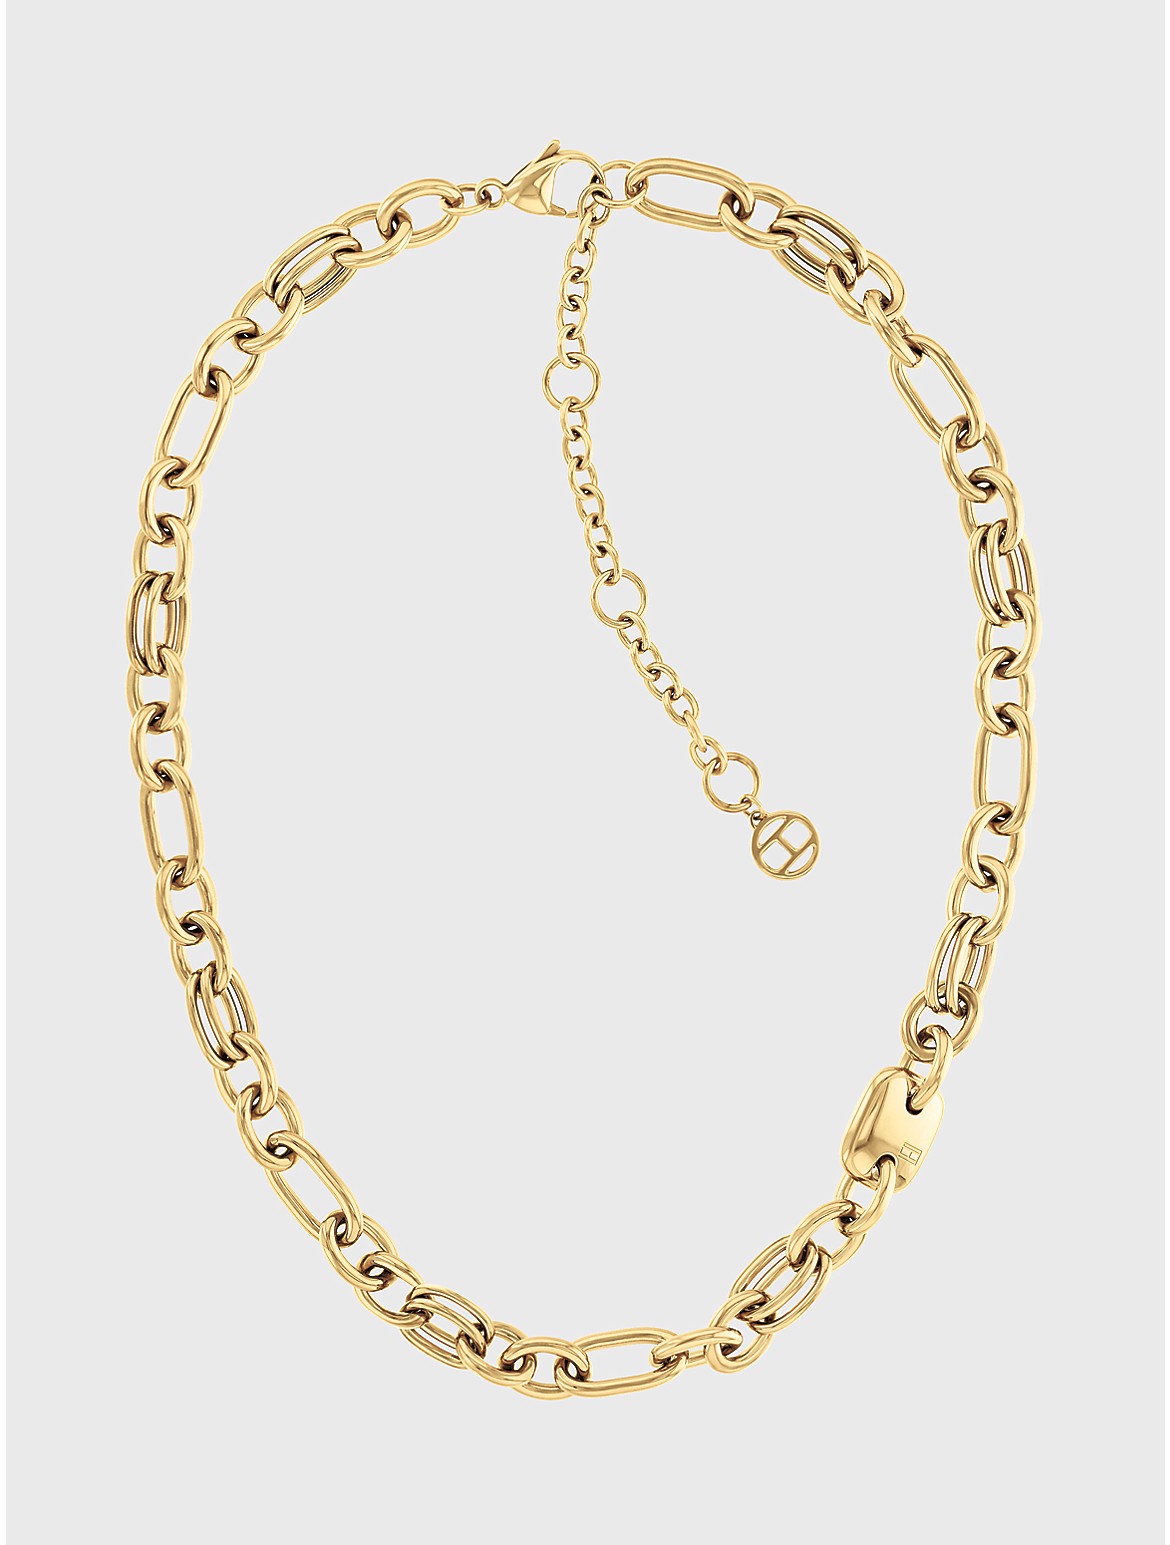 Tommy Hilfiger Women's Mixed Chain Link Gold-Tone Necklace - Metallic